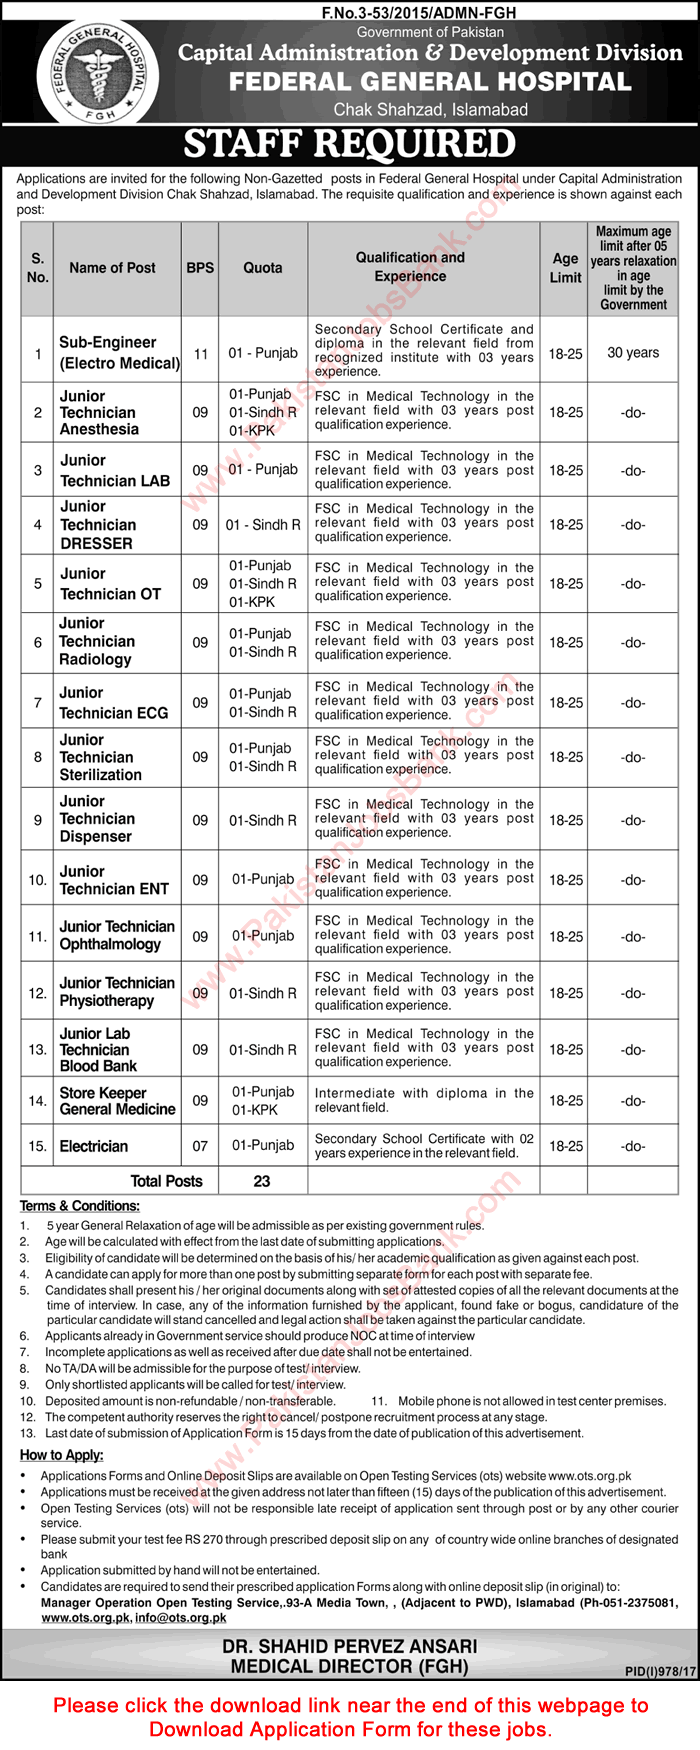 Federal General Hospital Islamabad Jobs 2017 August OTS Application Form Medical Technicians & Others Latest